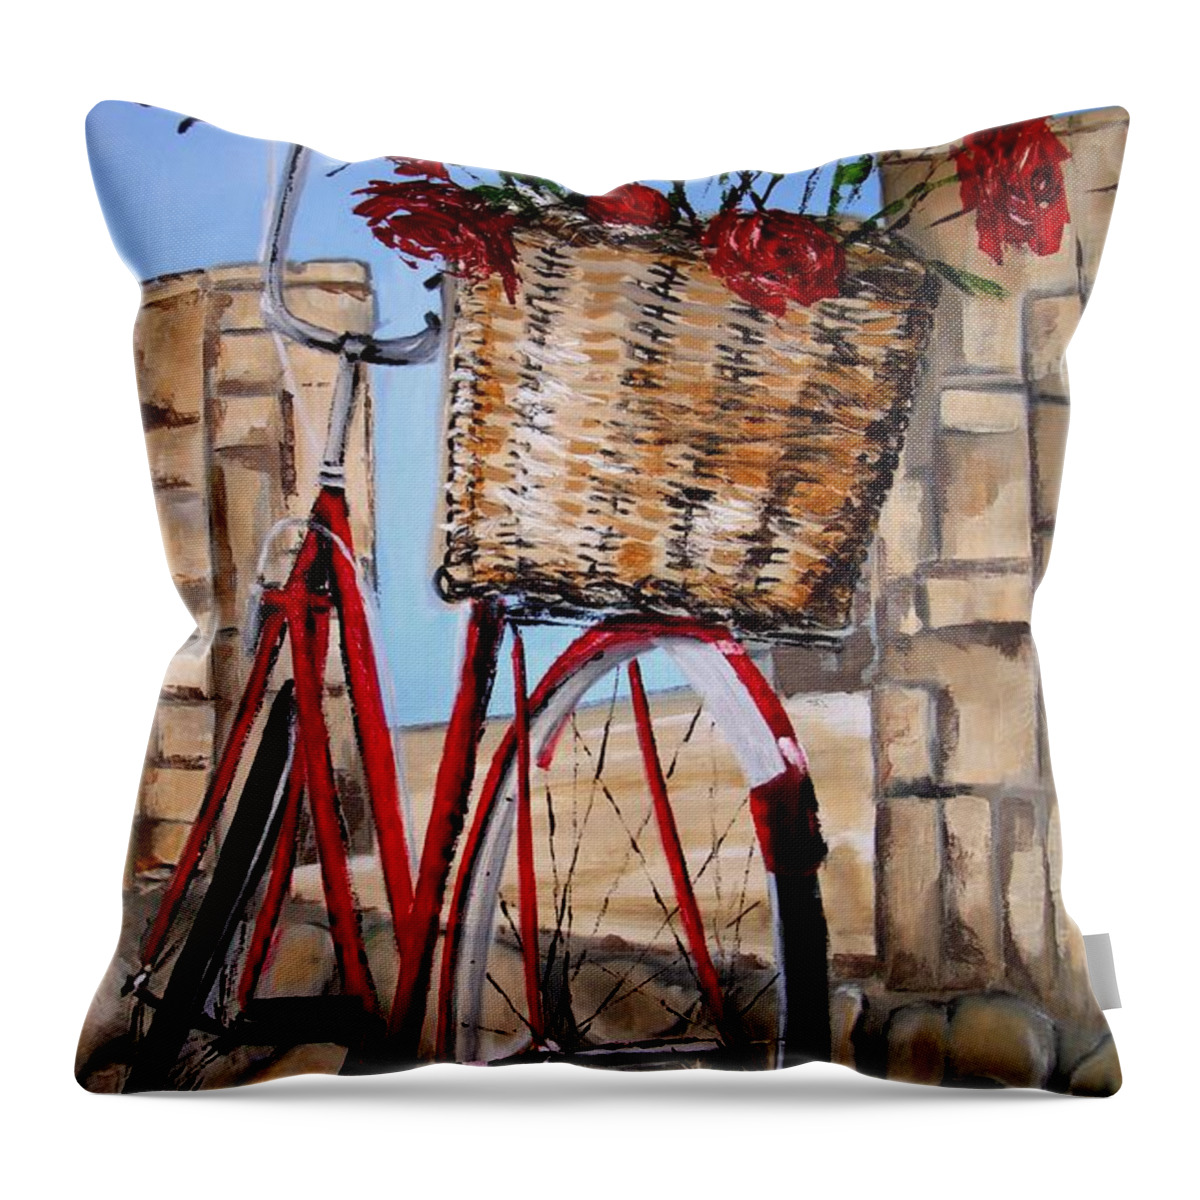 Red Throw Pillow featuring the painting Red Bicycle by Sunel De Lange